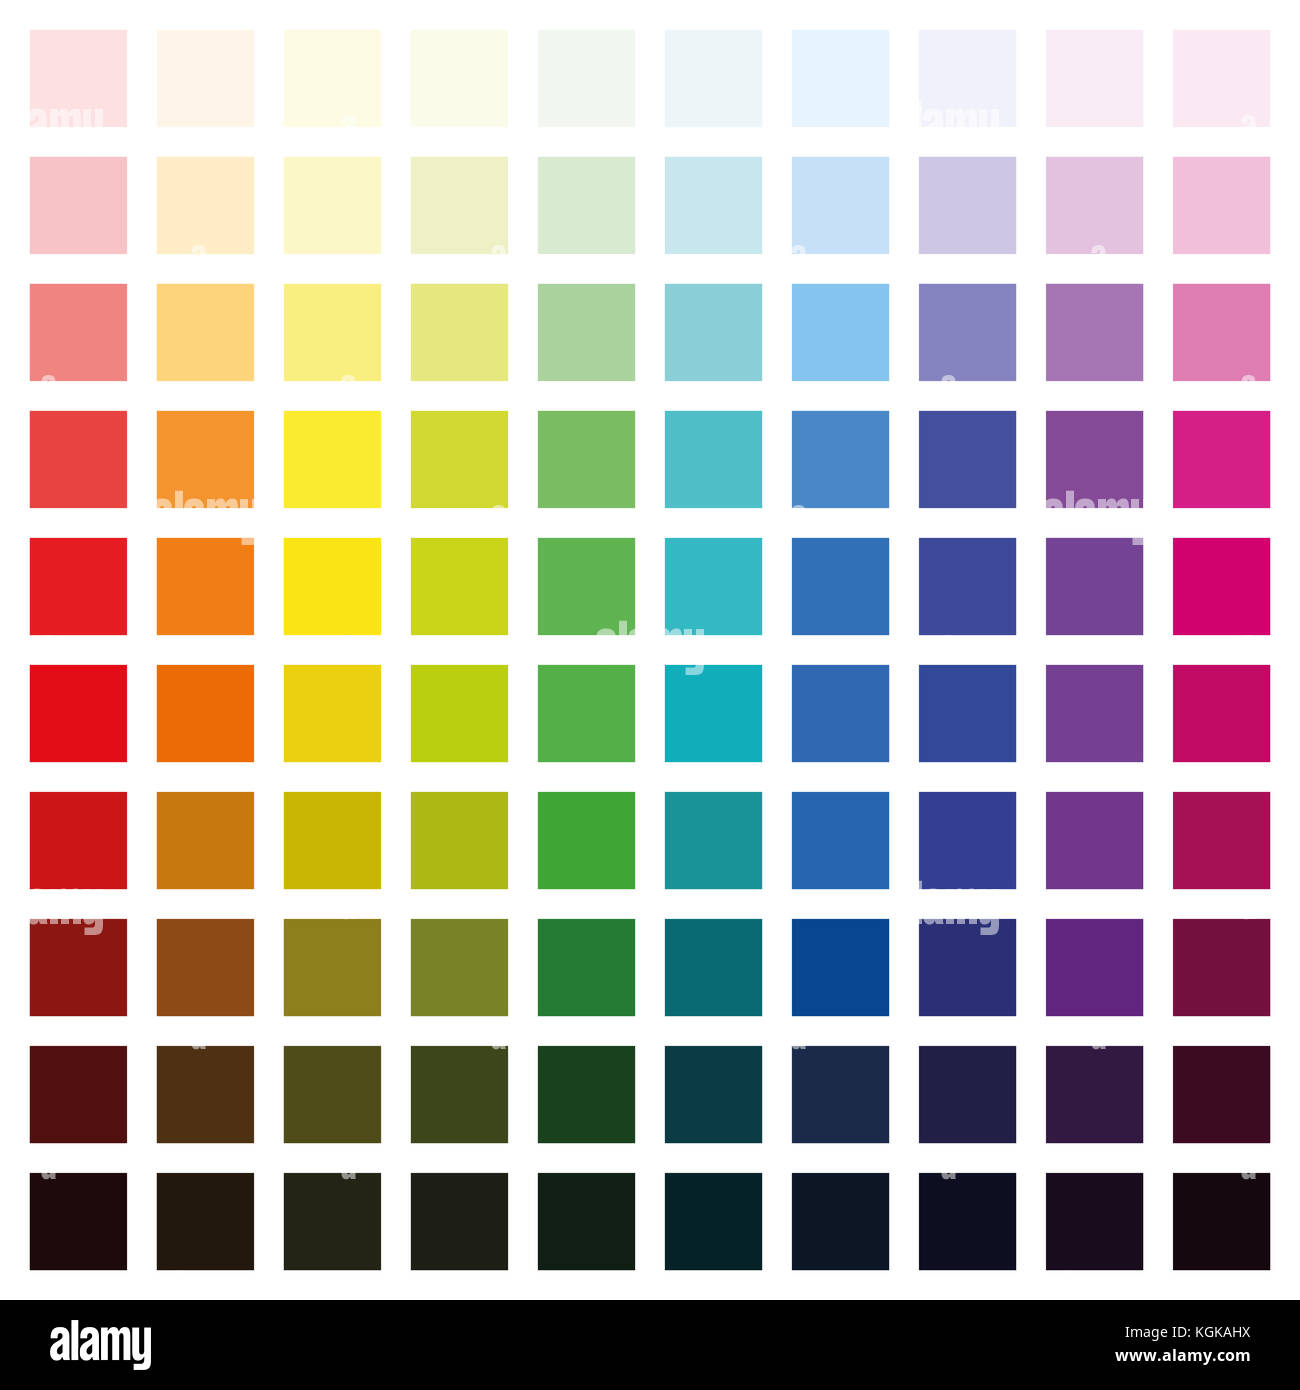 Color spectrum chart with hundred different colors in various saturation  from light to dark - square size format illustration on white background  Stock Photo - Alamy